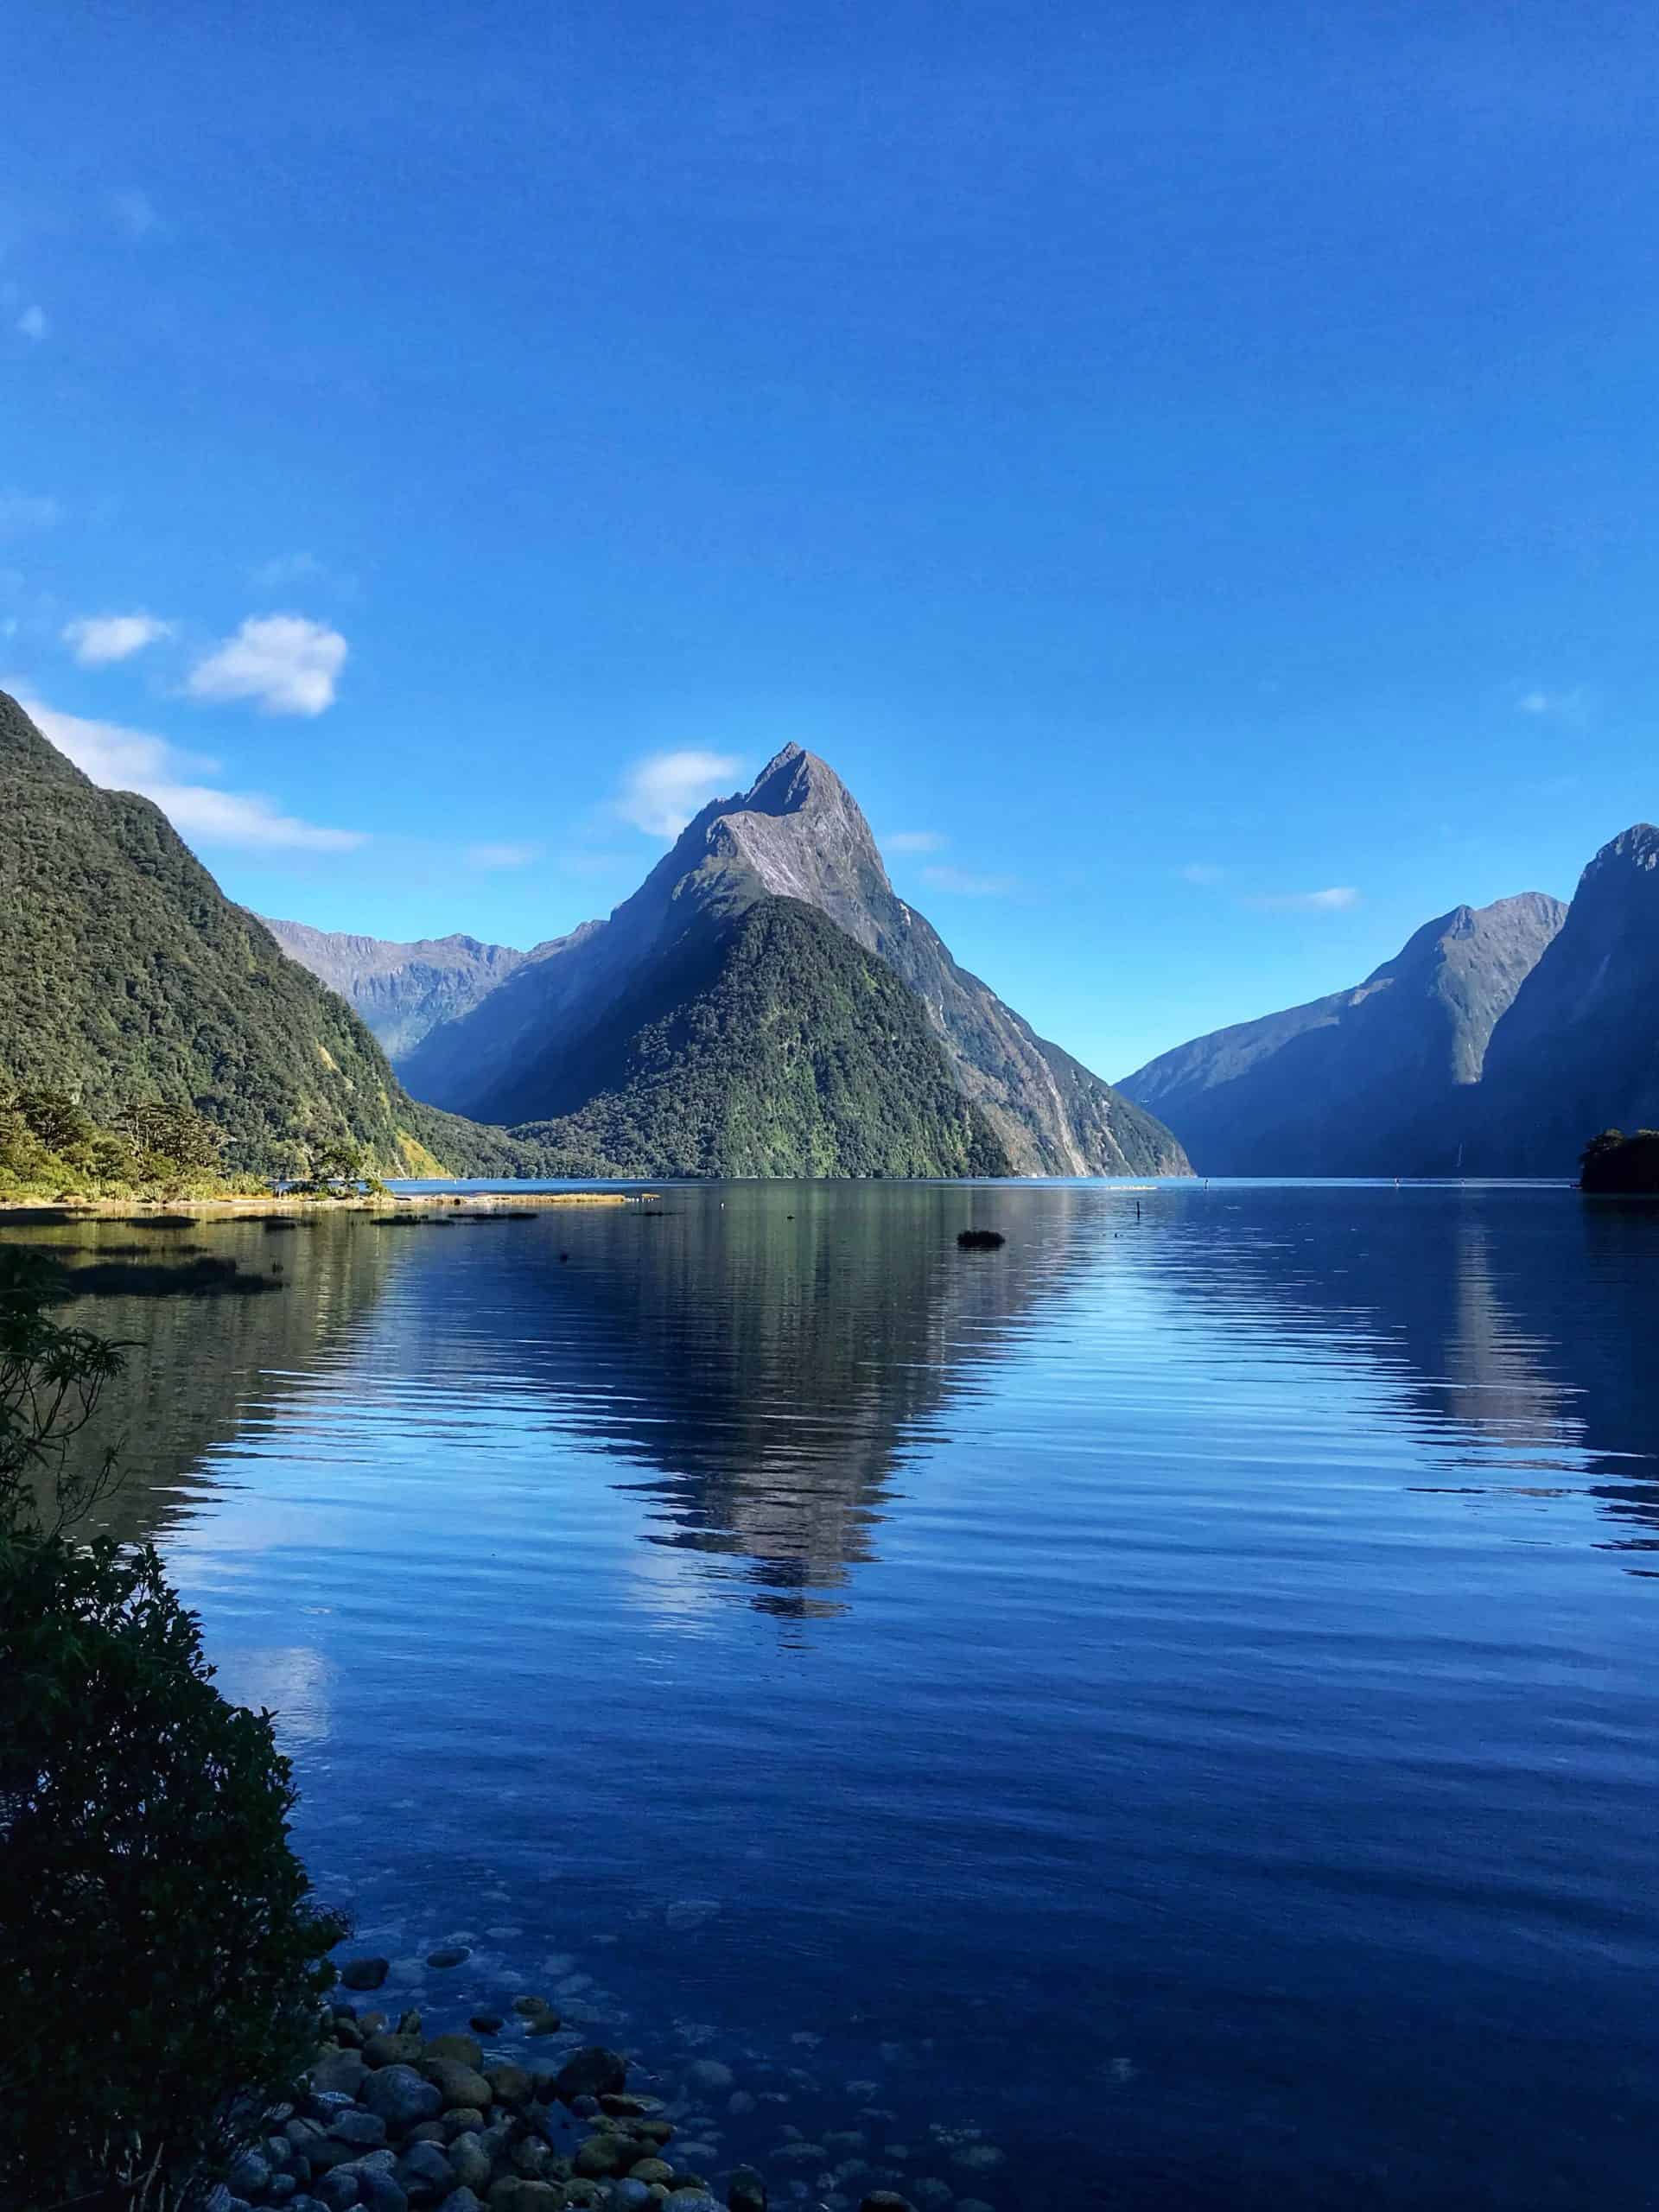 Sandflies are rife in New Zealand, especially at Milford Sound